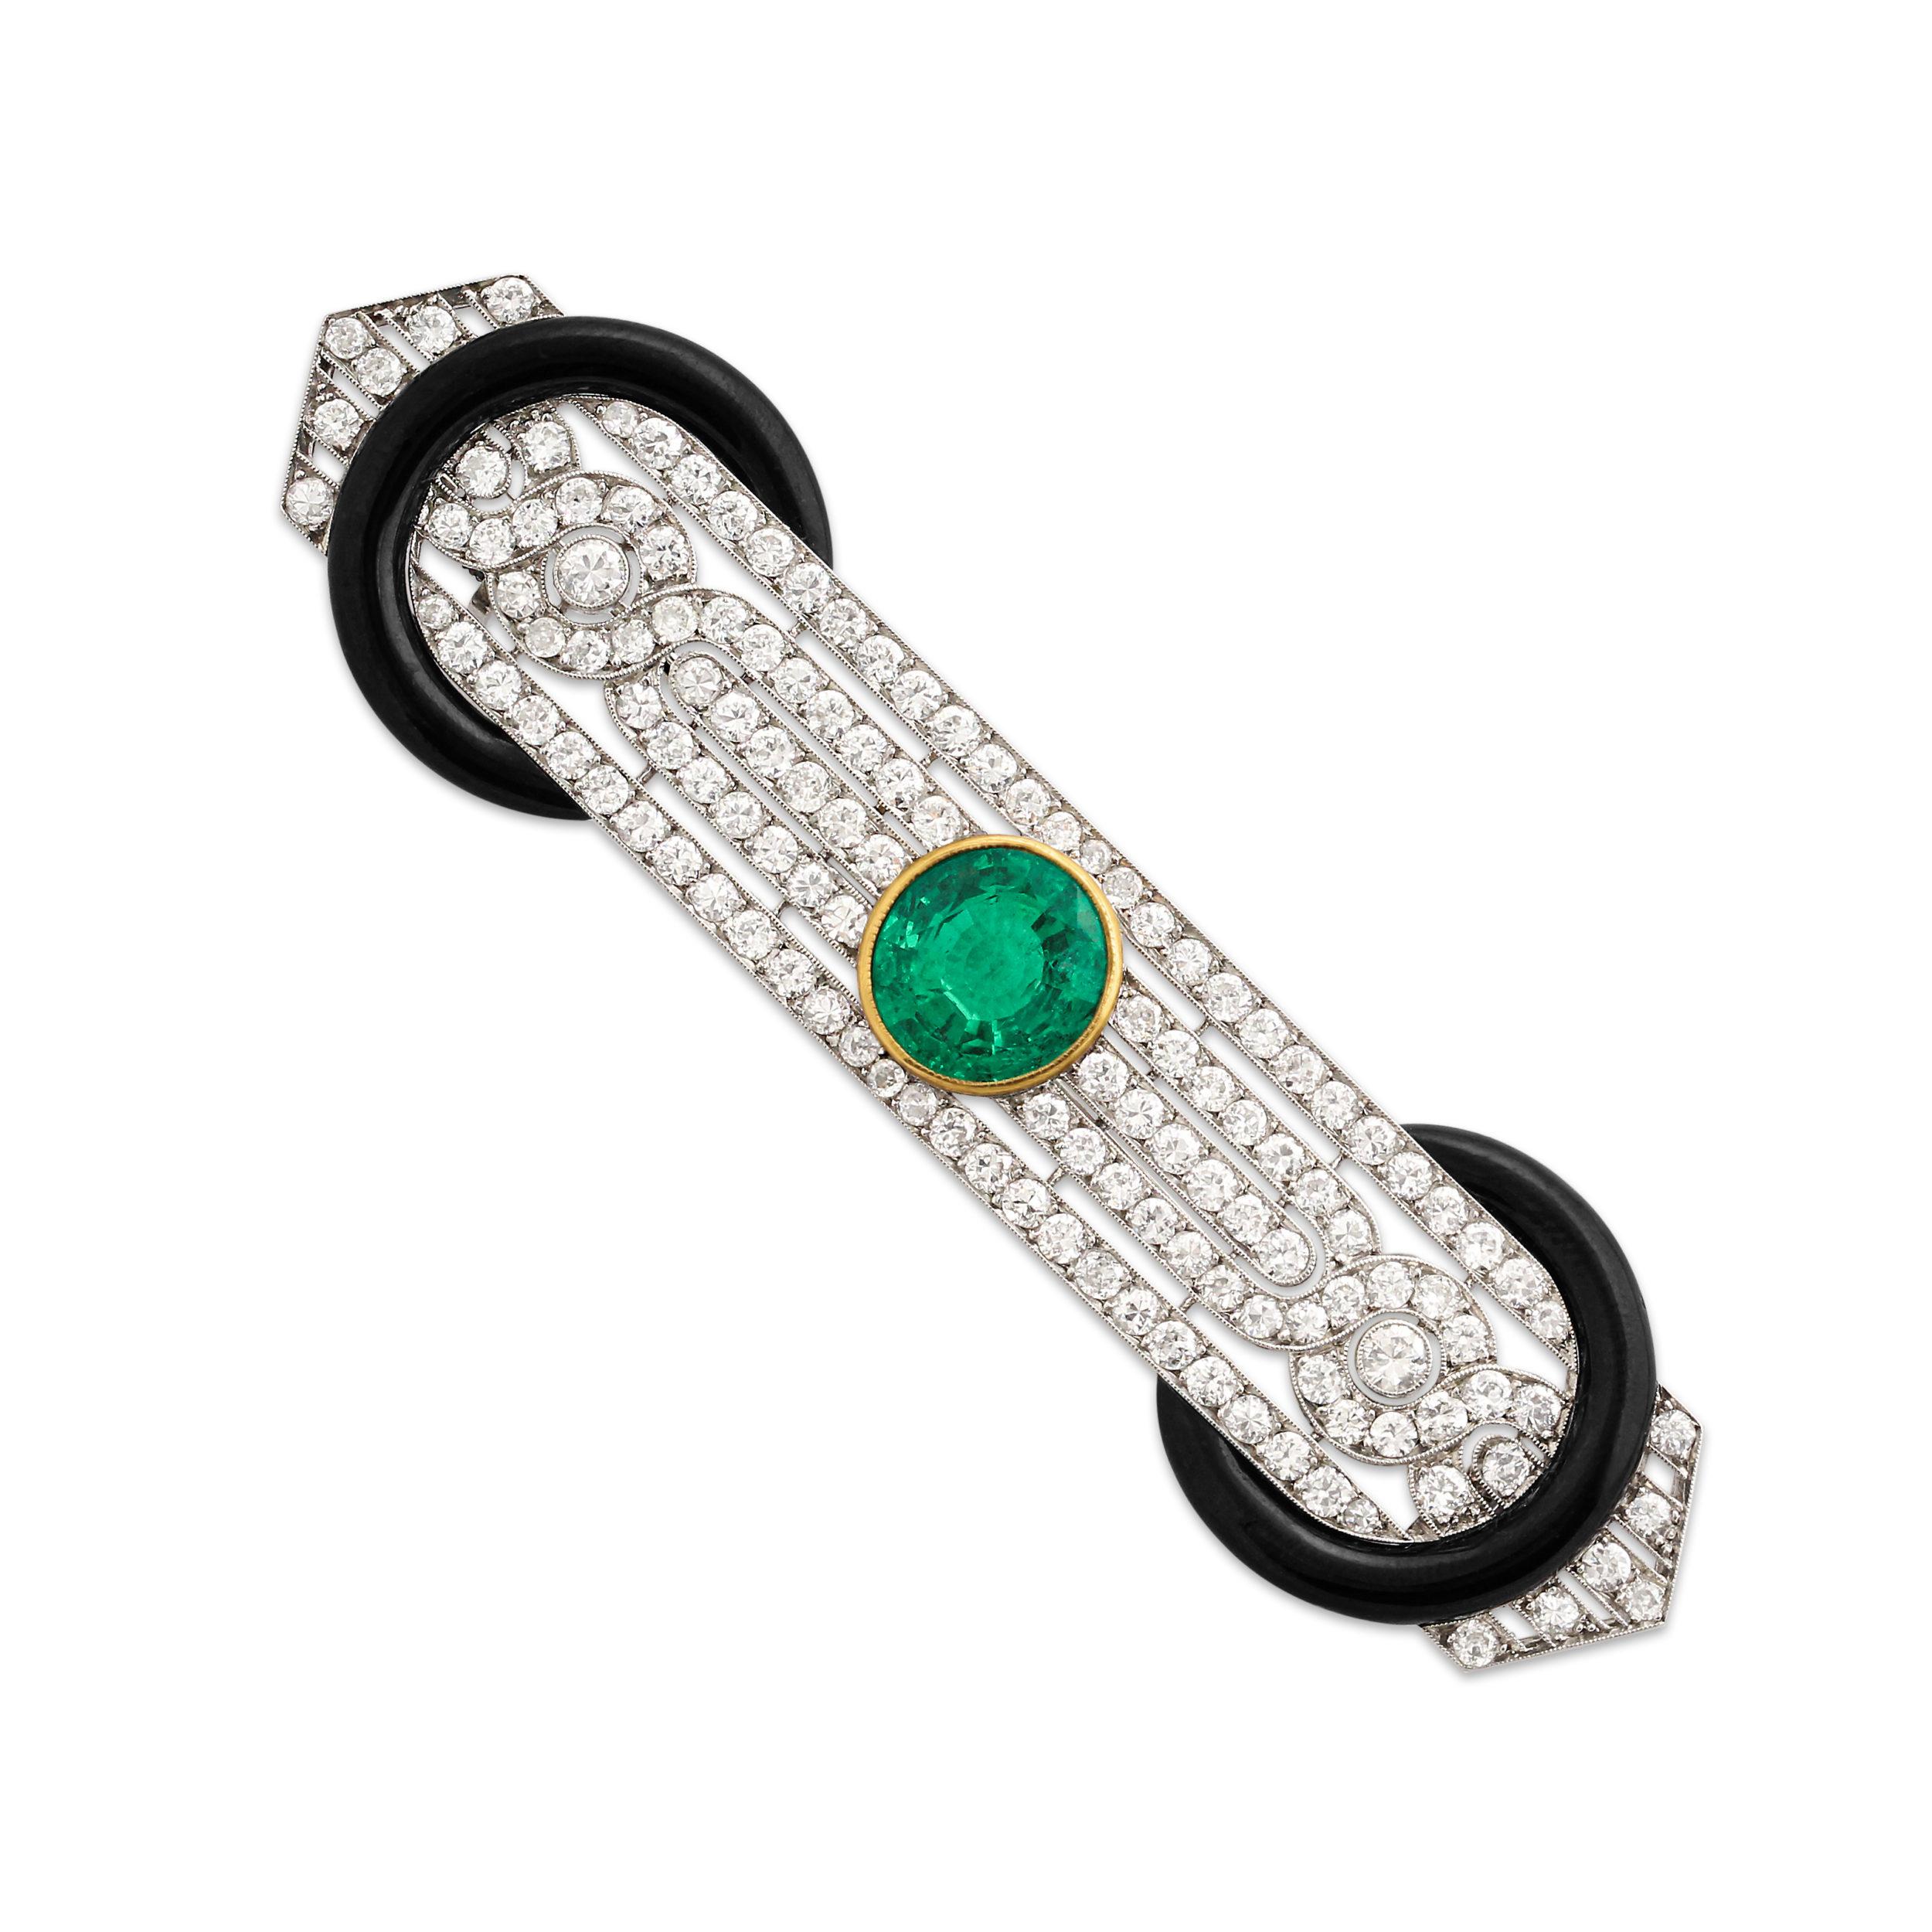 An Art Deco emerald, diamond and enamel brooch. The brooch is set at the centre with  2.70 carat Colombian emerald bezel set in yellow gold surrounded by approximately 5.50 carats of diamonds mounted in platinum with black enamel accents on either